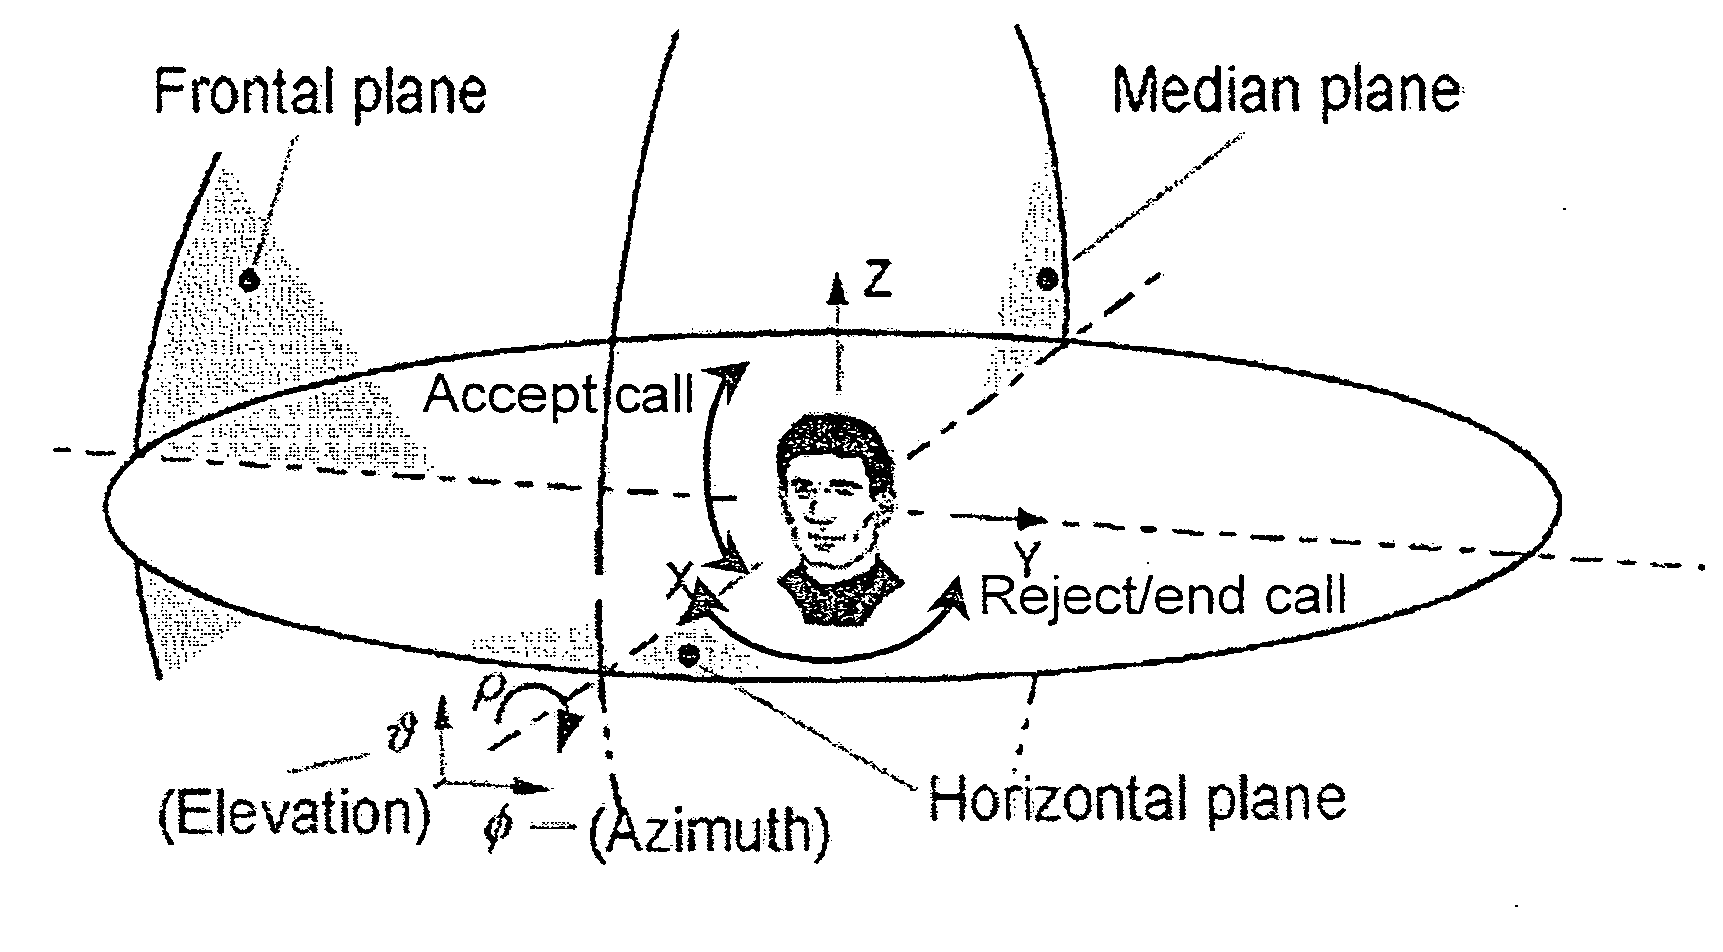 Head mounted voice communication device with motion control